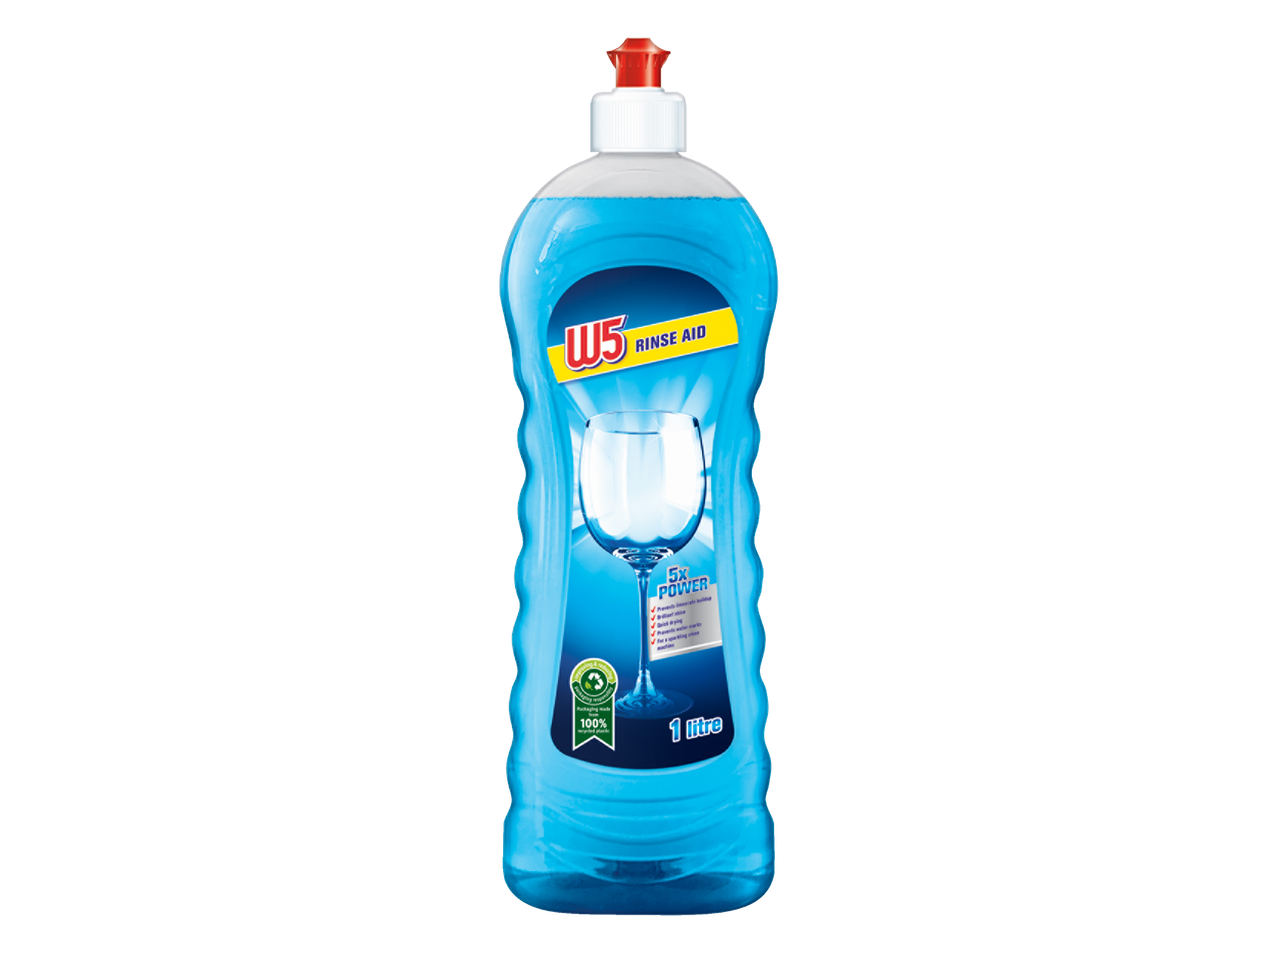 Go to full screen view: W5 Rinse Aid - Image 1